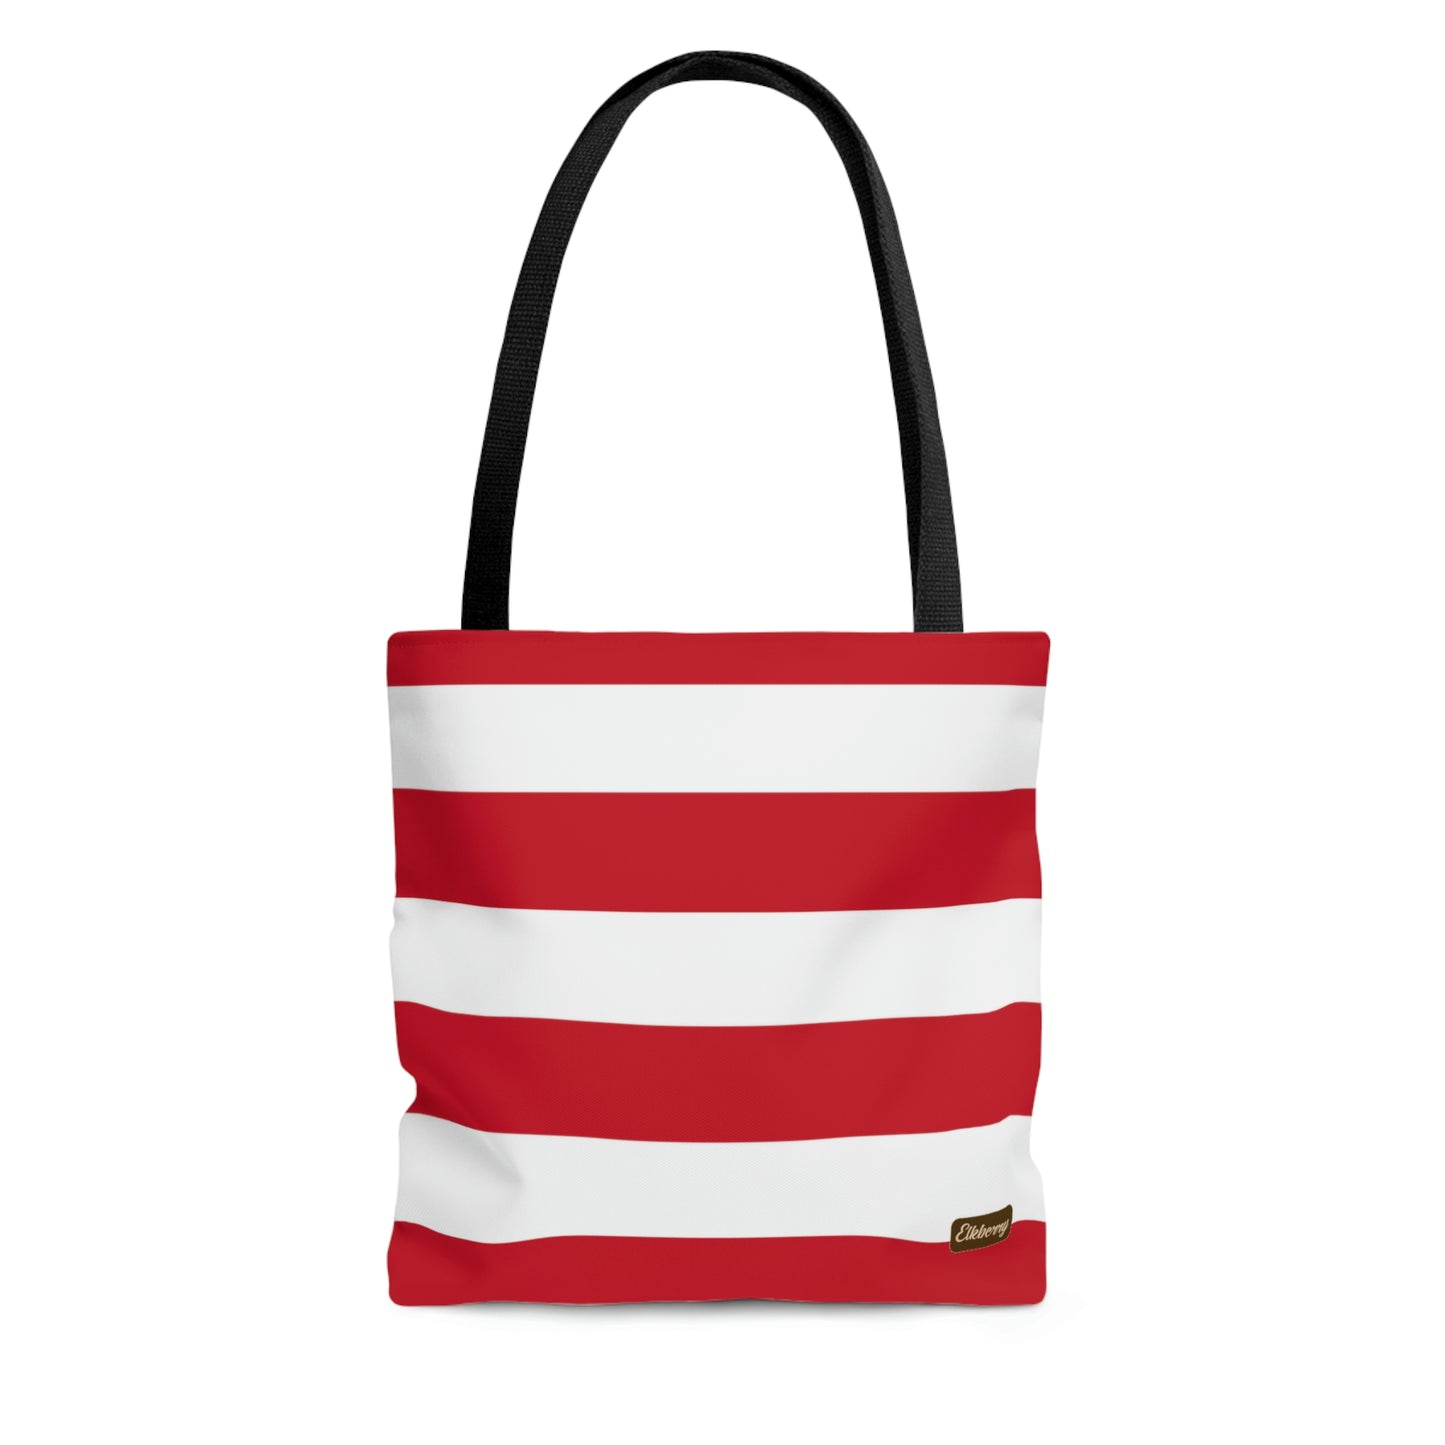 Lightweight Tote Bag - Red/White Stripes